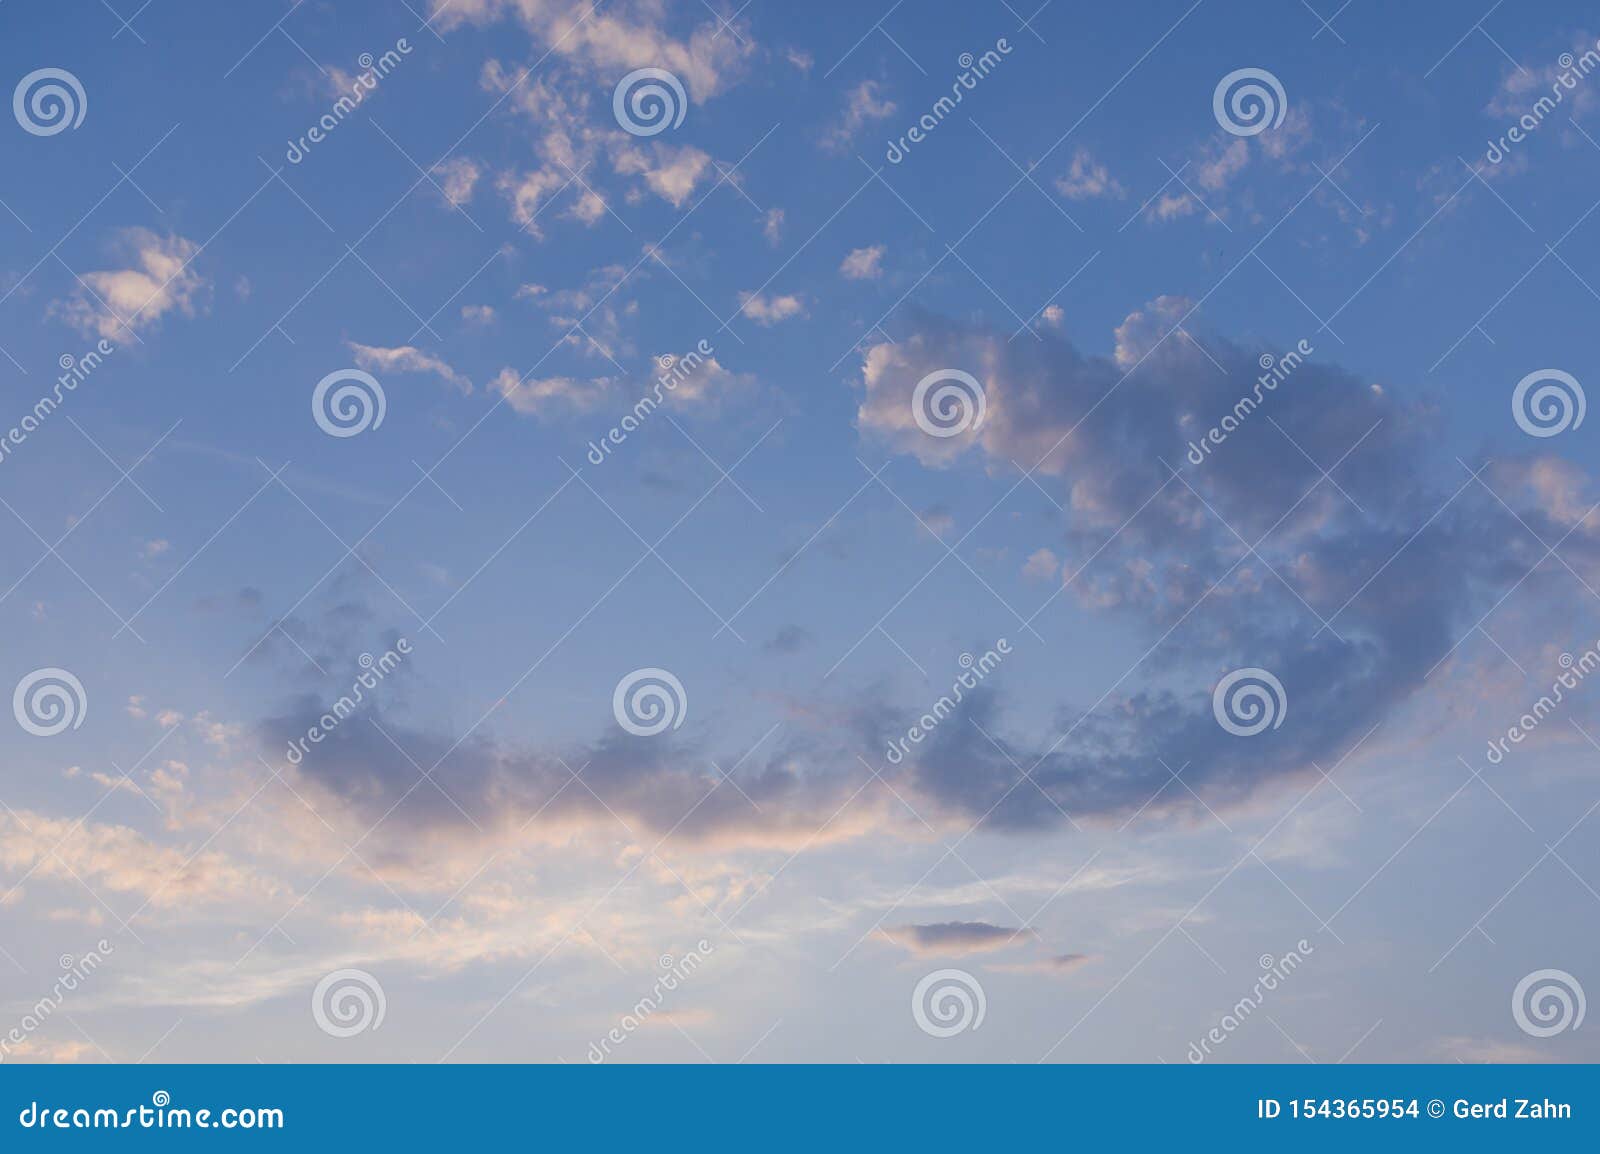 Blue Sky With White Clouds In Arch Form With Red Coloring By